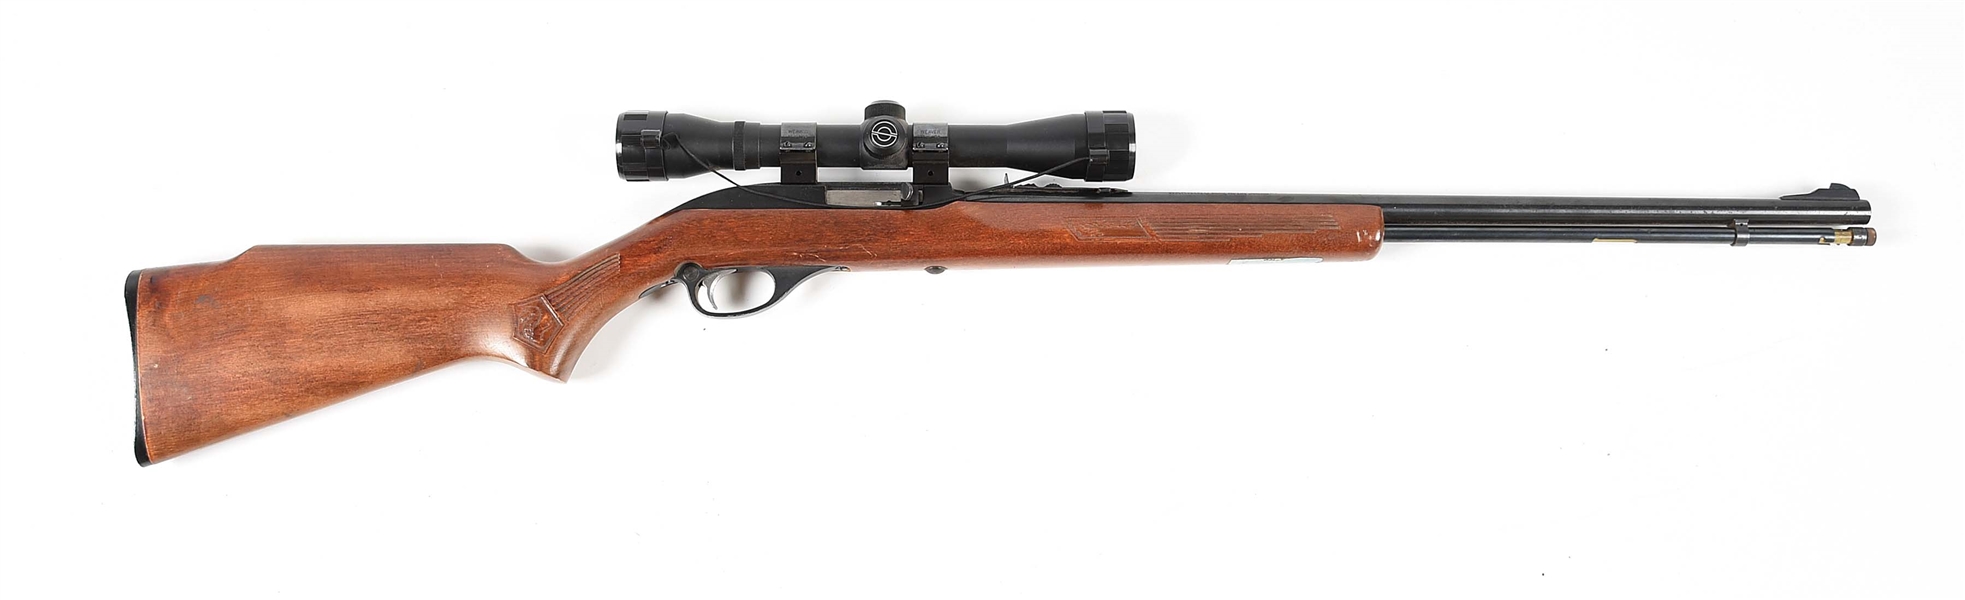 (M) MARLIN GLENFIELD MODEL 60 SEMI AUTOMATIC RIFLE WITH SCOPE